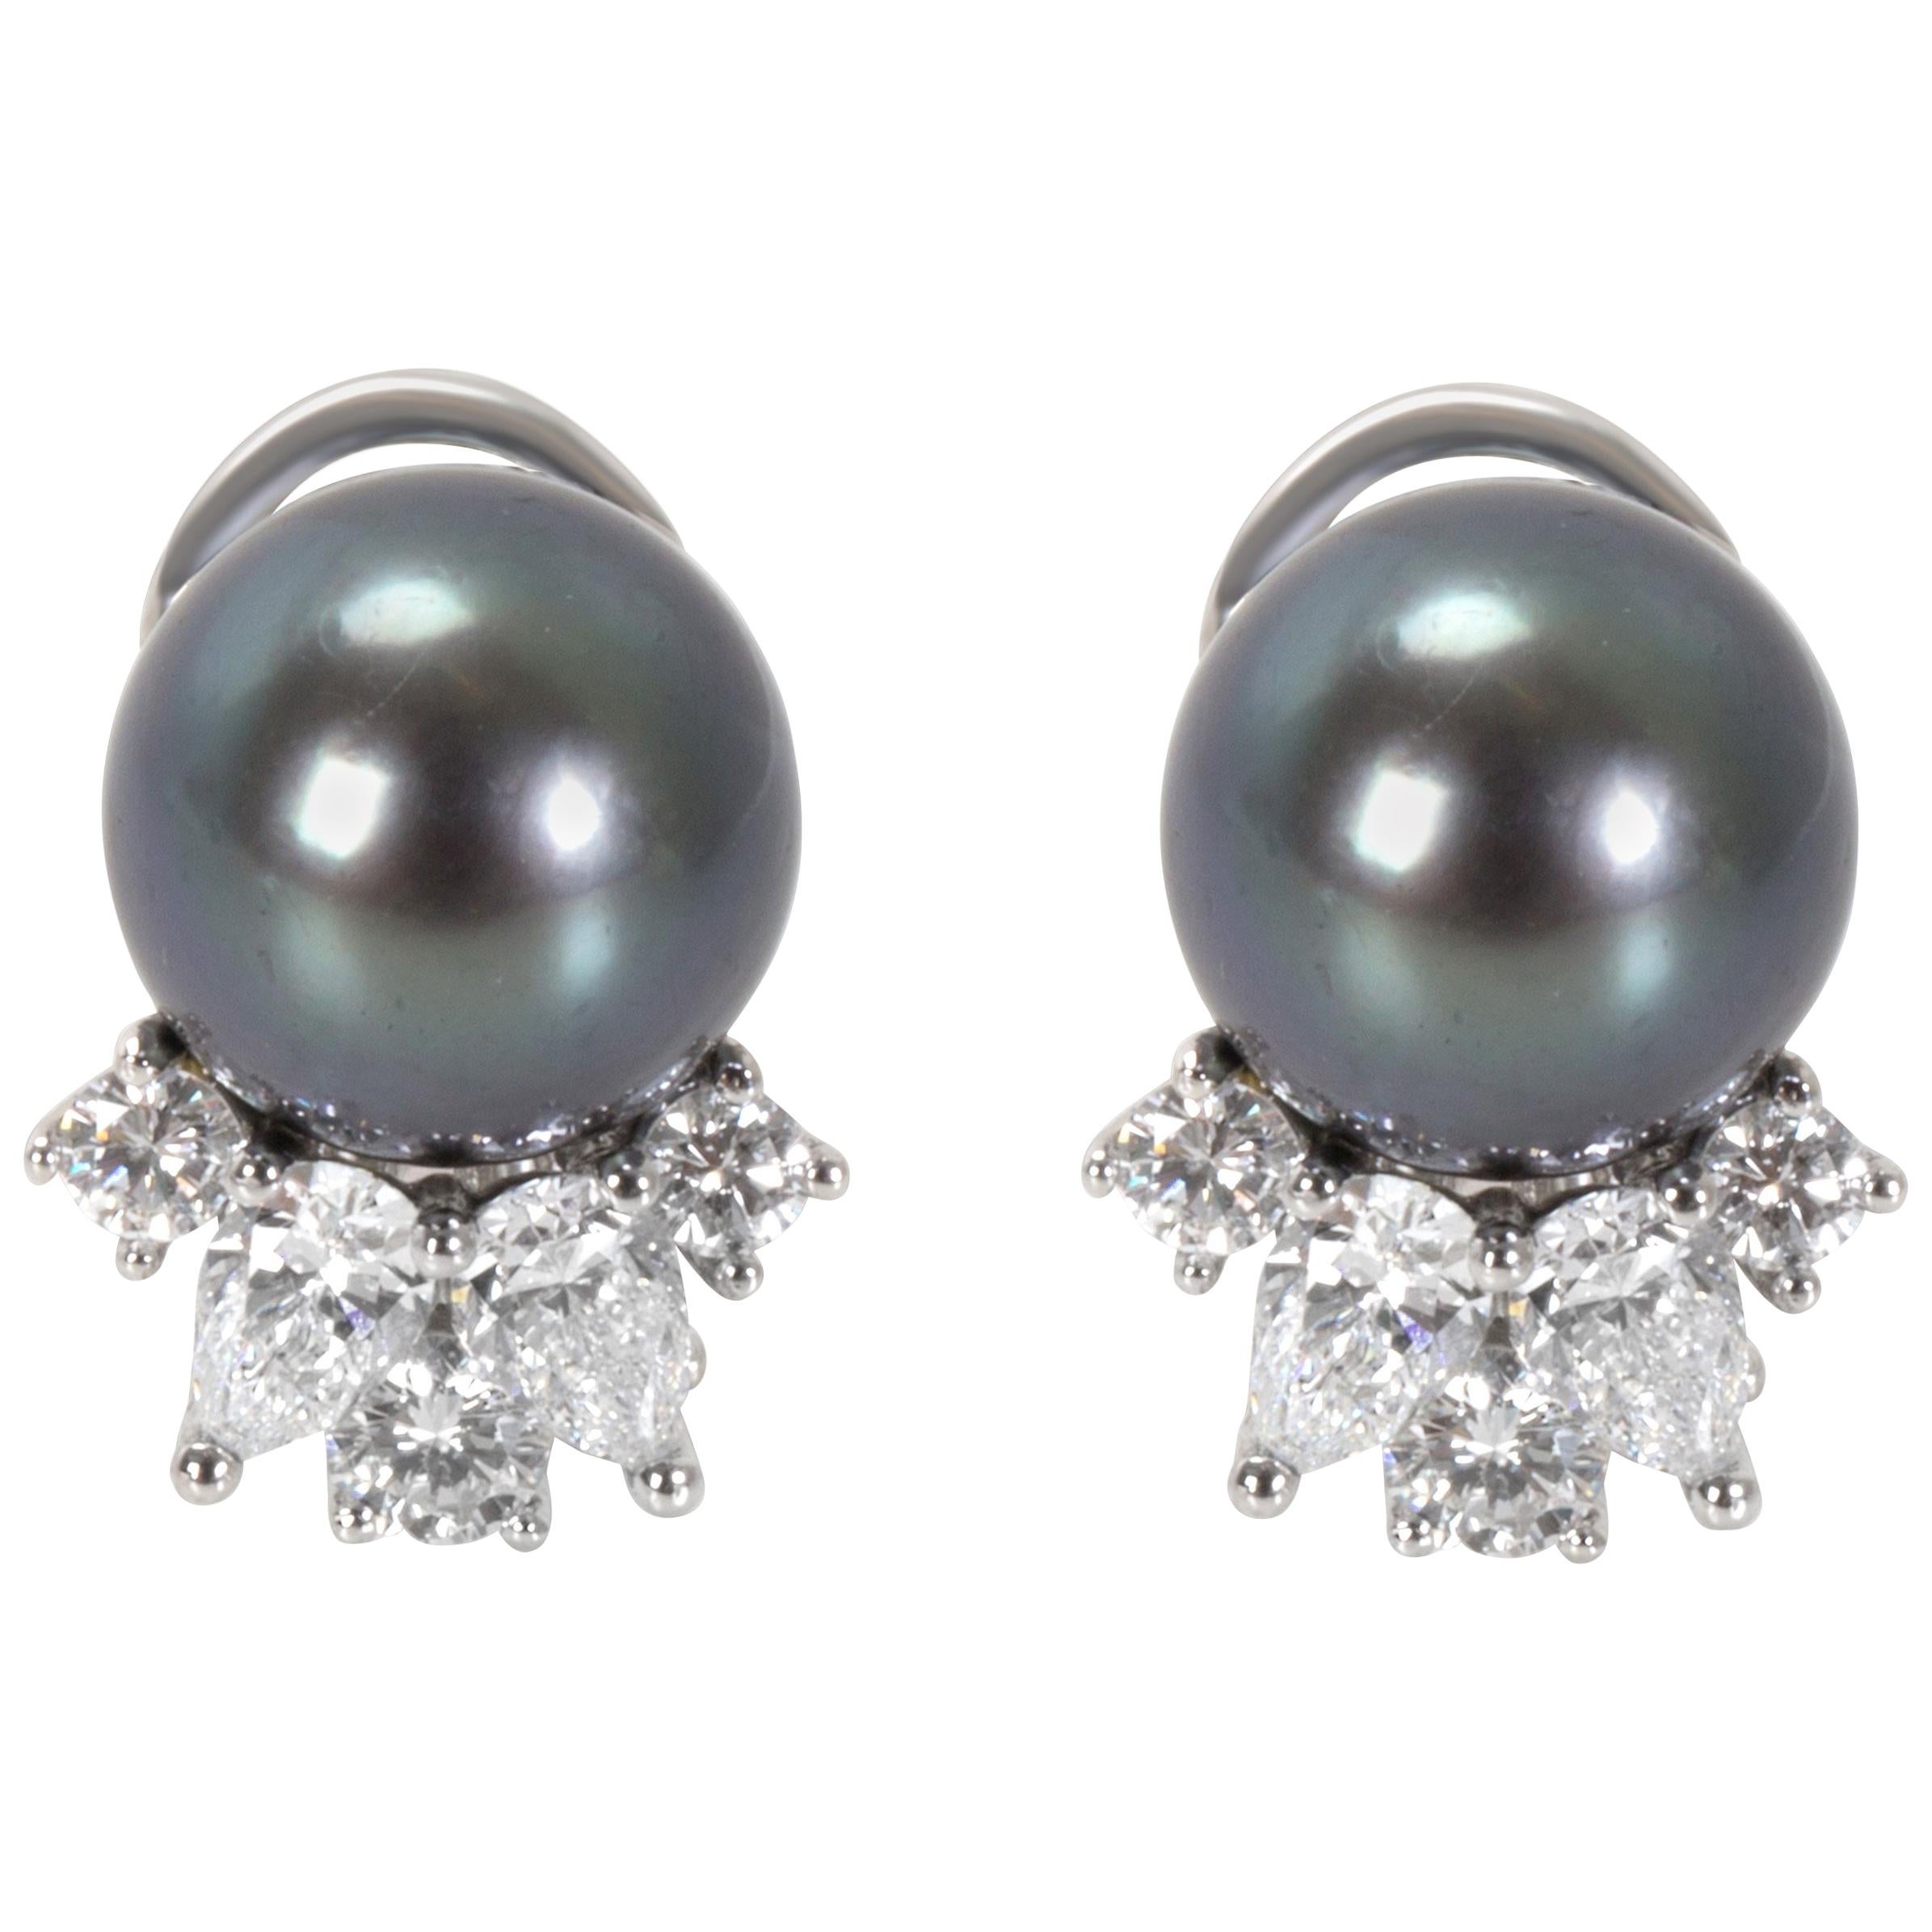 Tiffany & Co. Cecile Tahitian Cultured Pearl and Diamond Earrings in Platinum